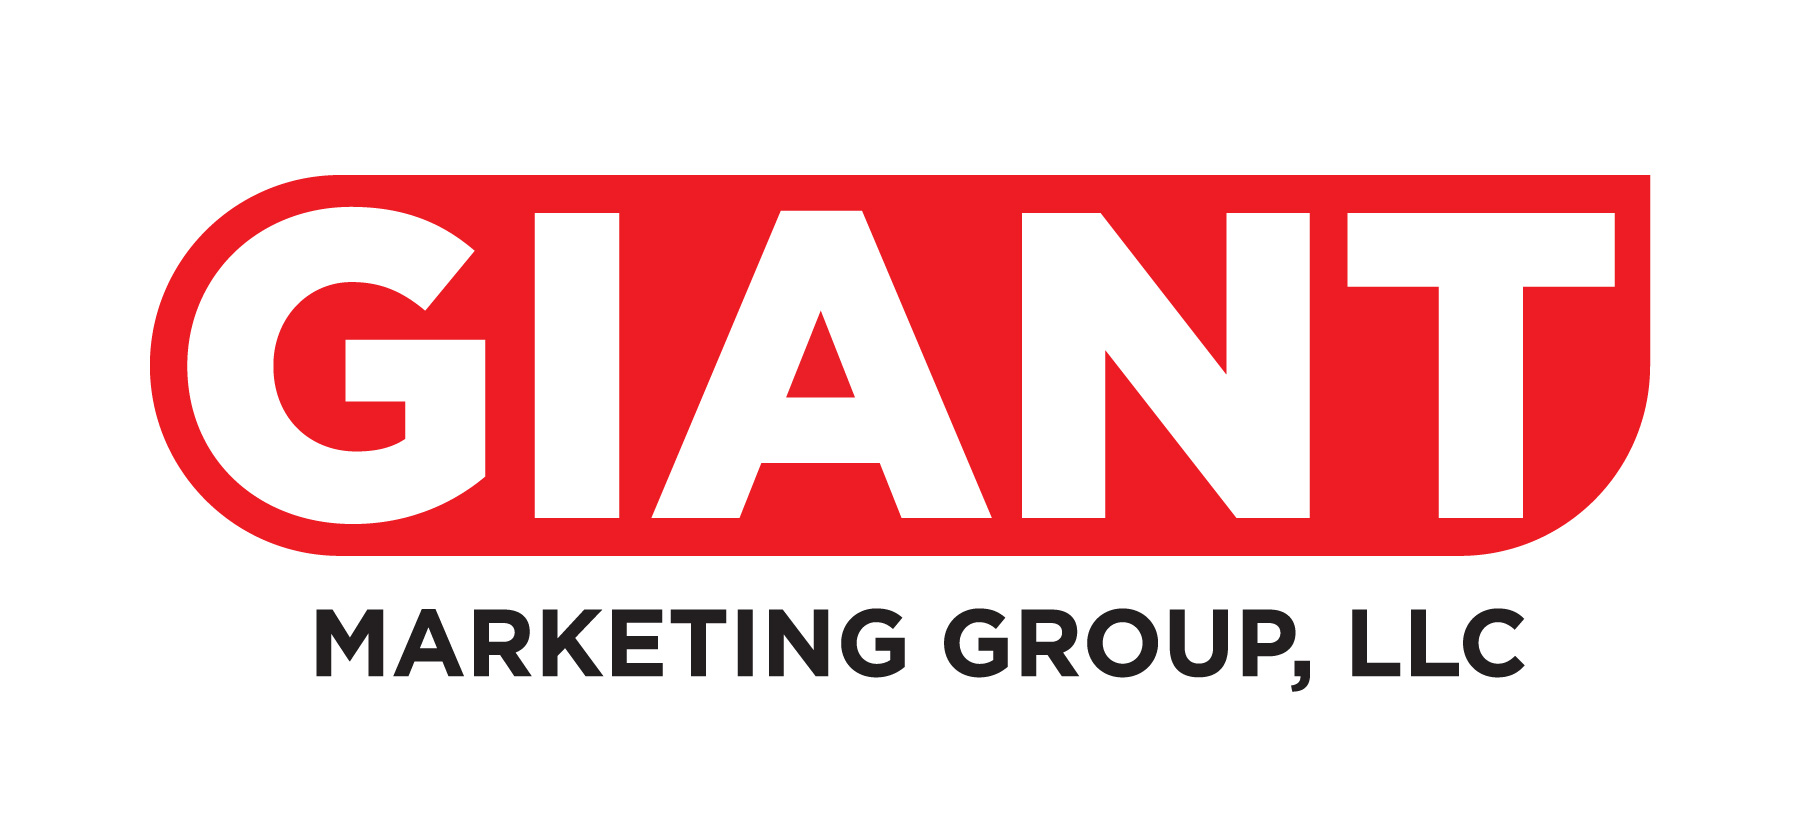 Giant Marketing Group LLC Your Leader in Print and Promotional Marketing Products!